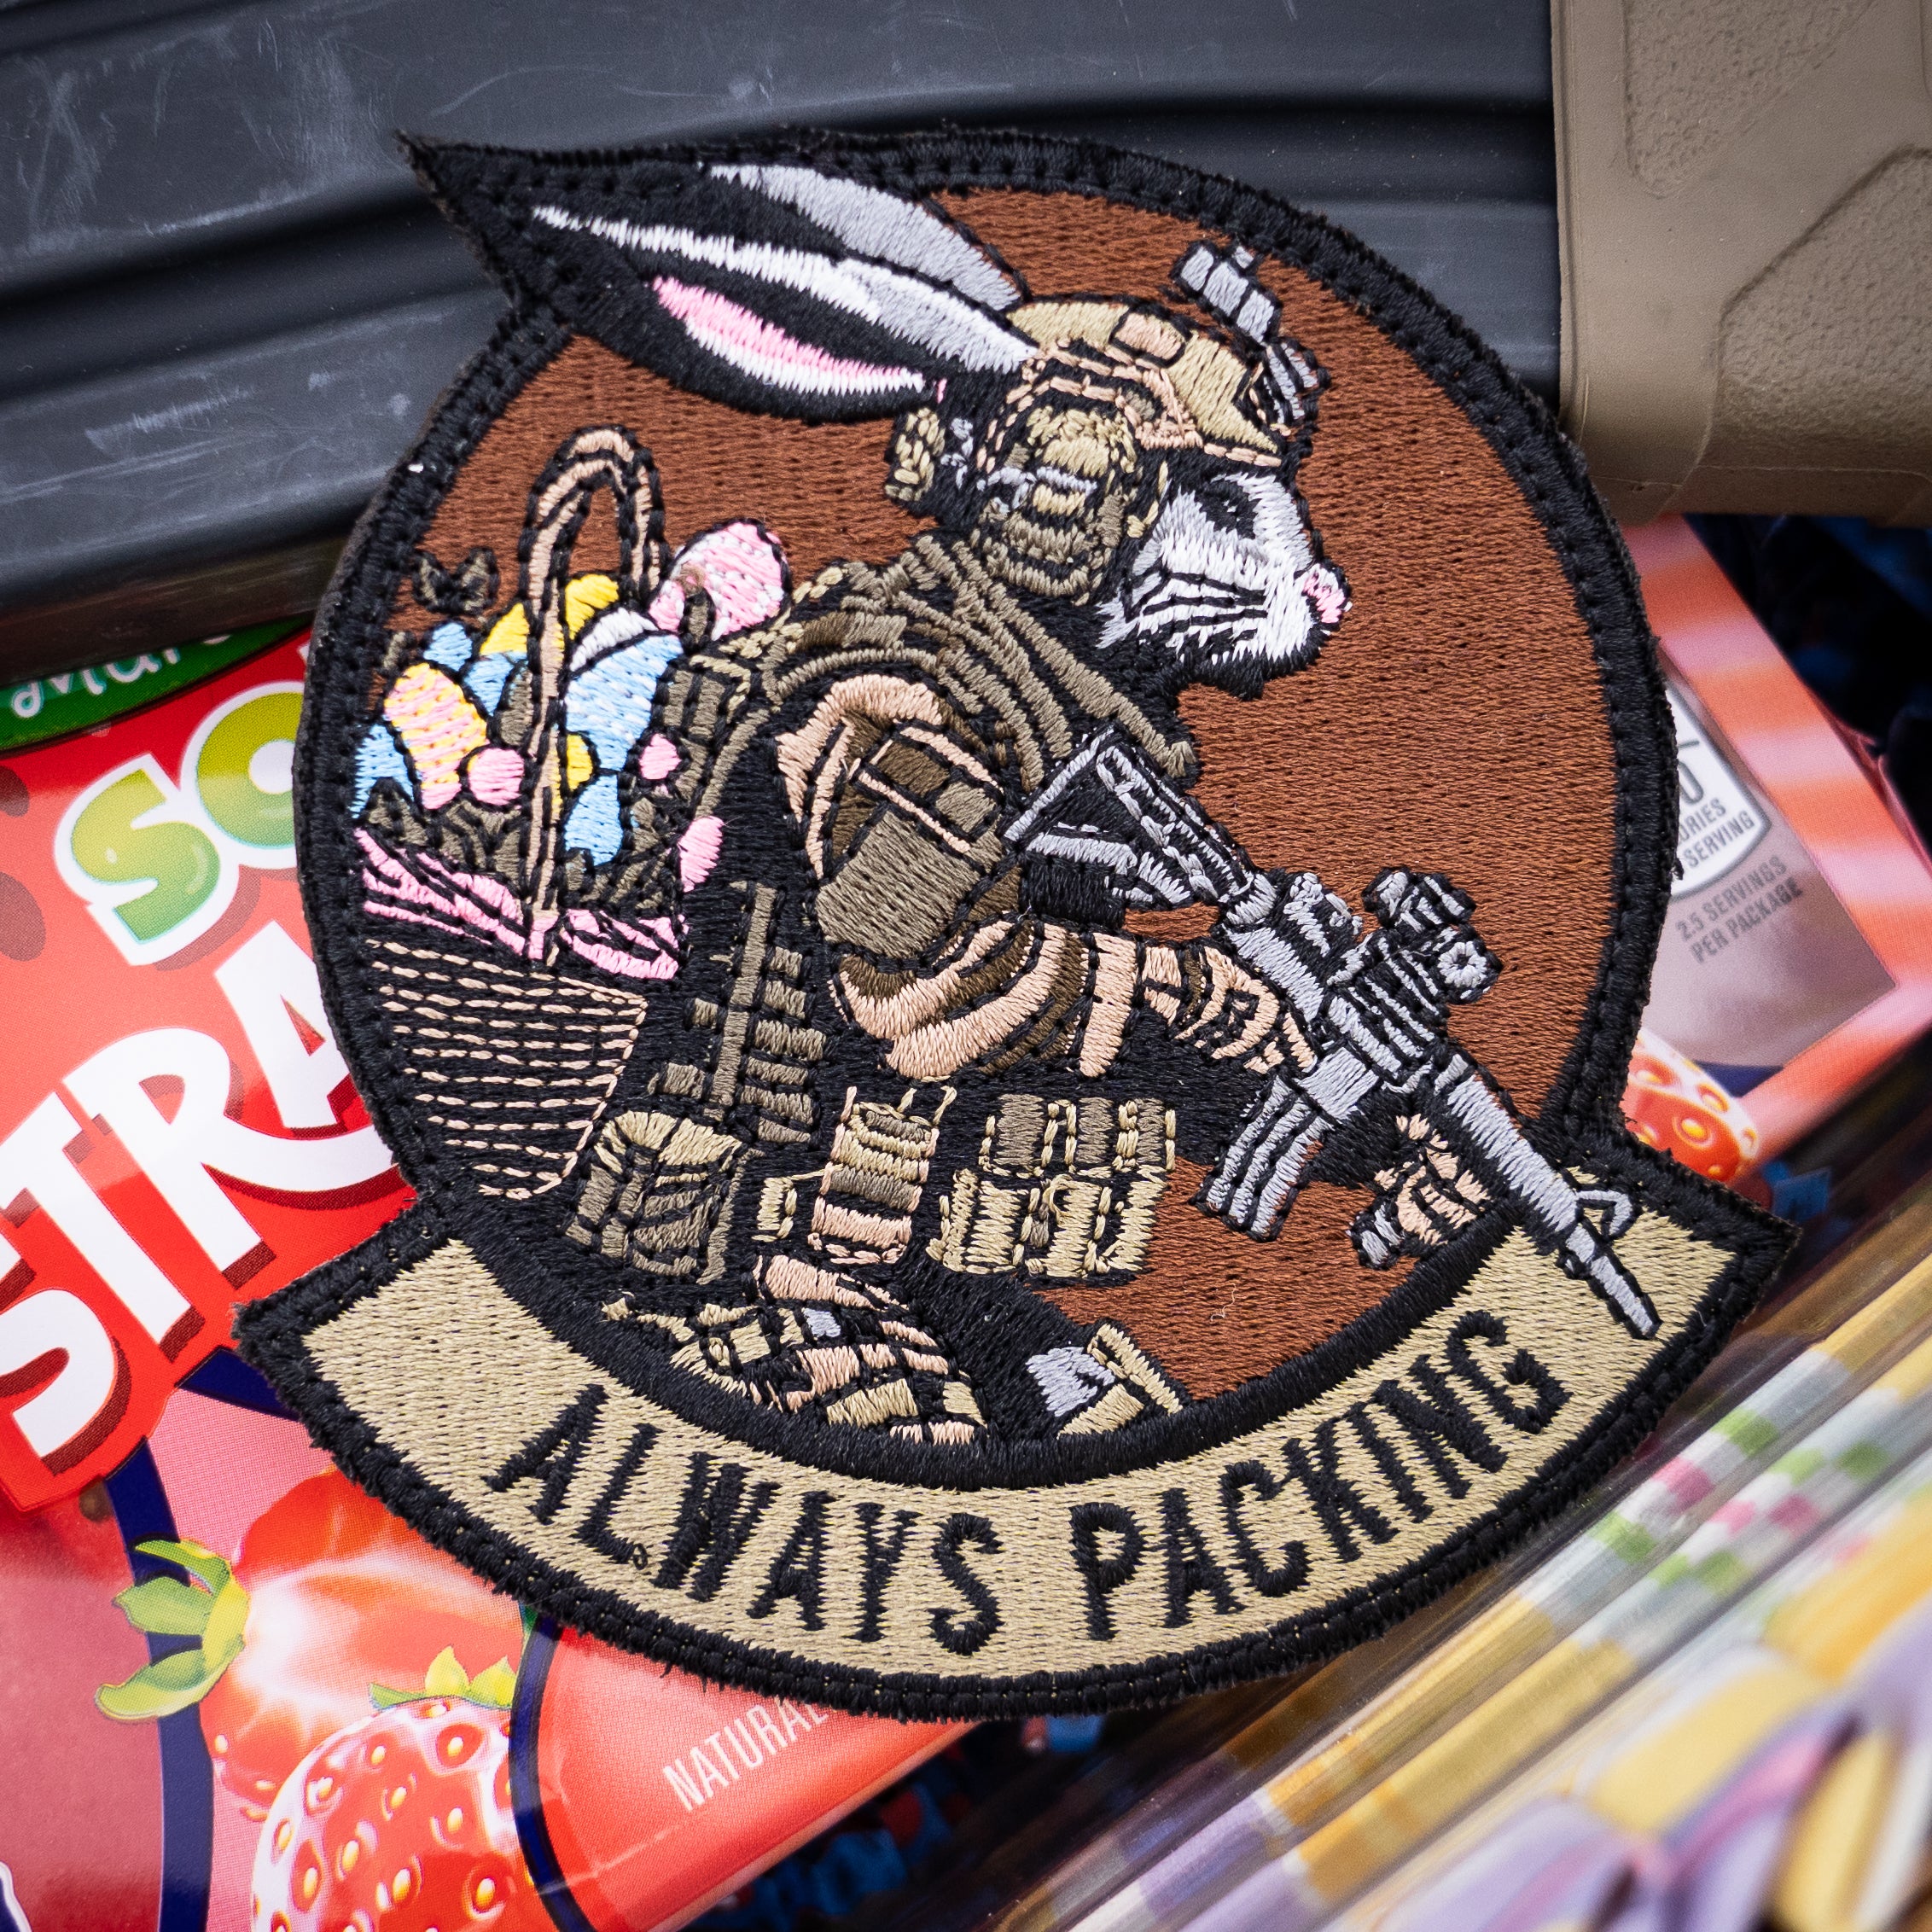 April 2024 POTM - 'Always Packing' - OCP Tactical Battle Bunny 4" Patch - Bad Bunny Collection